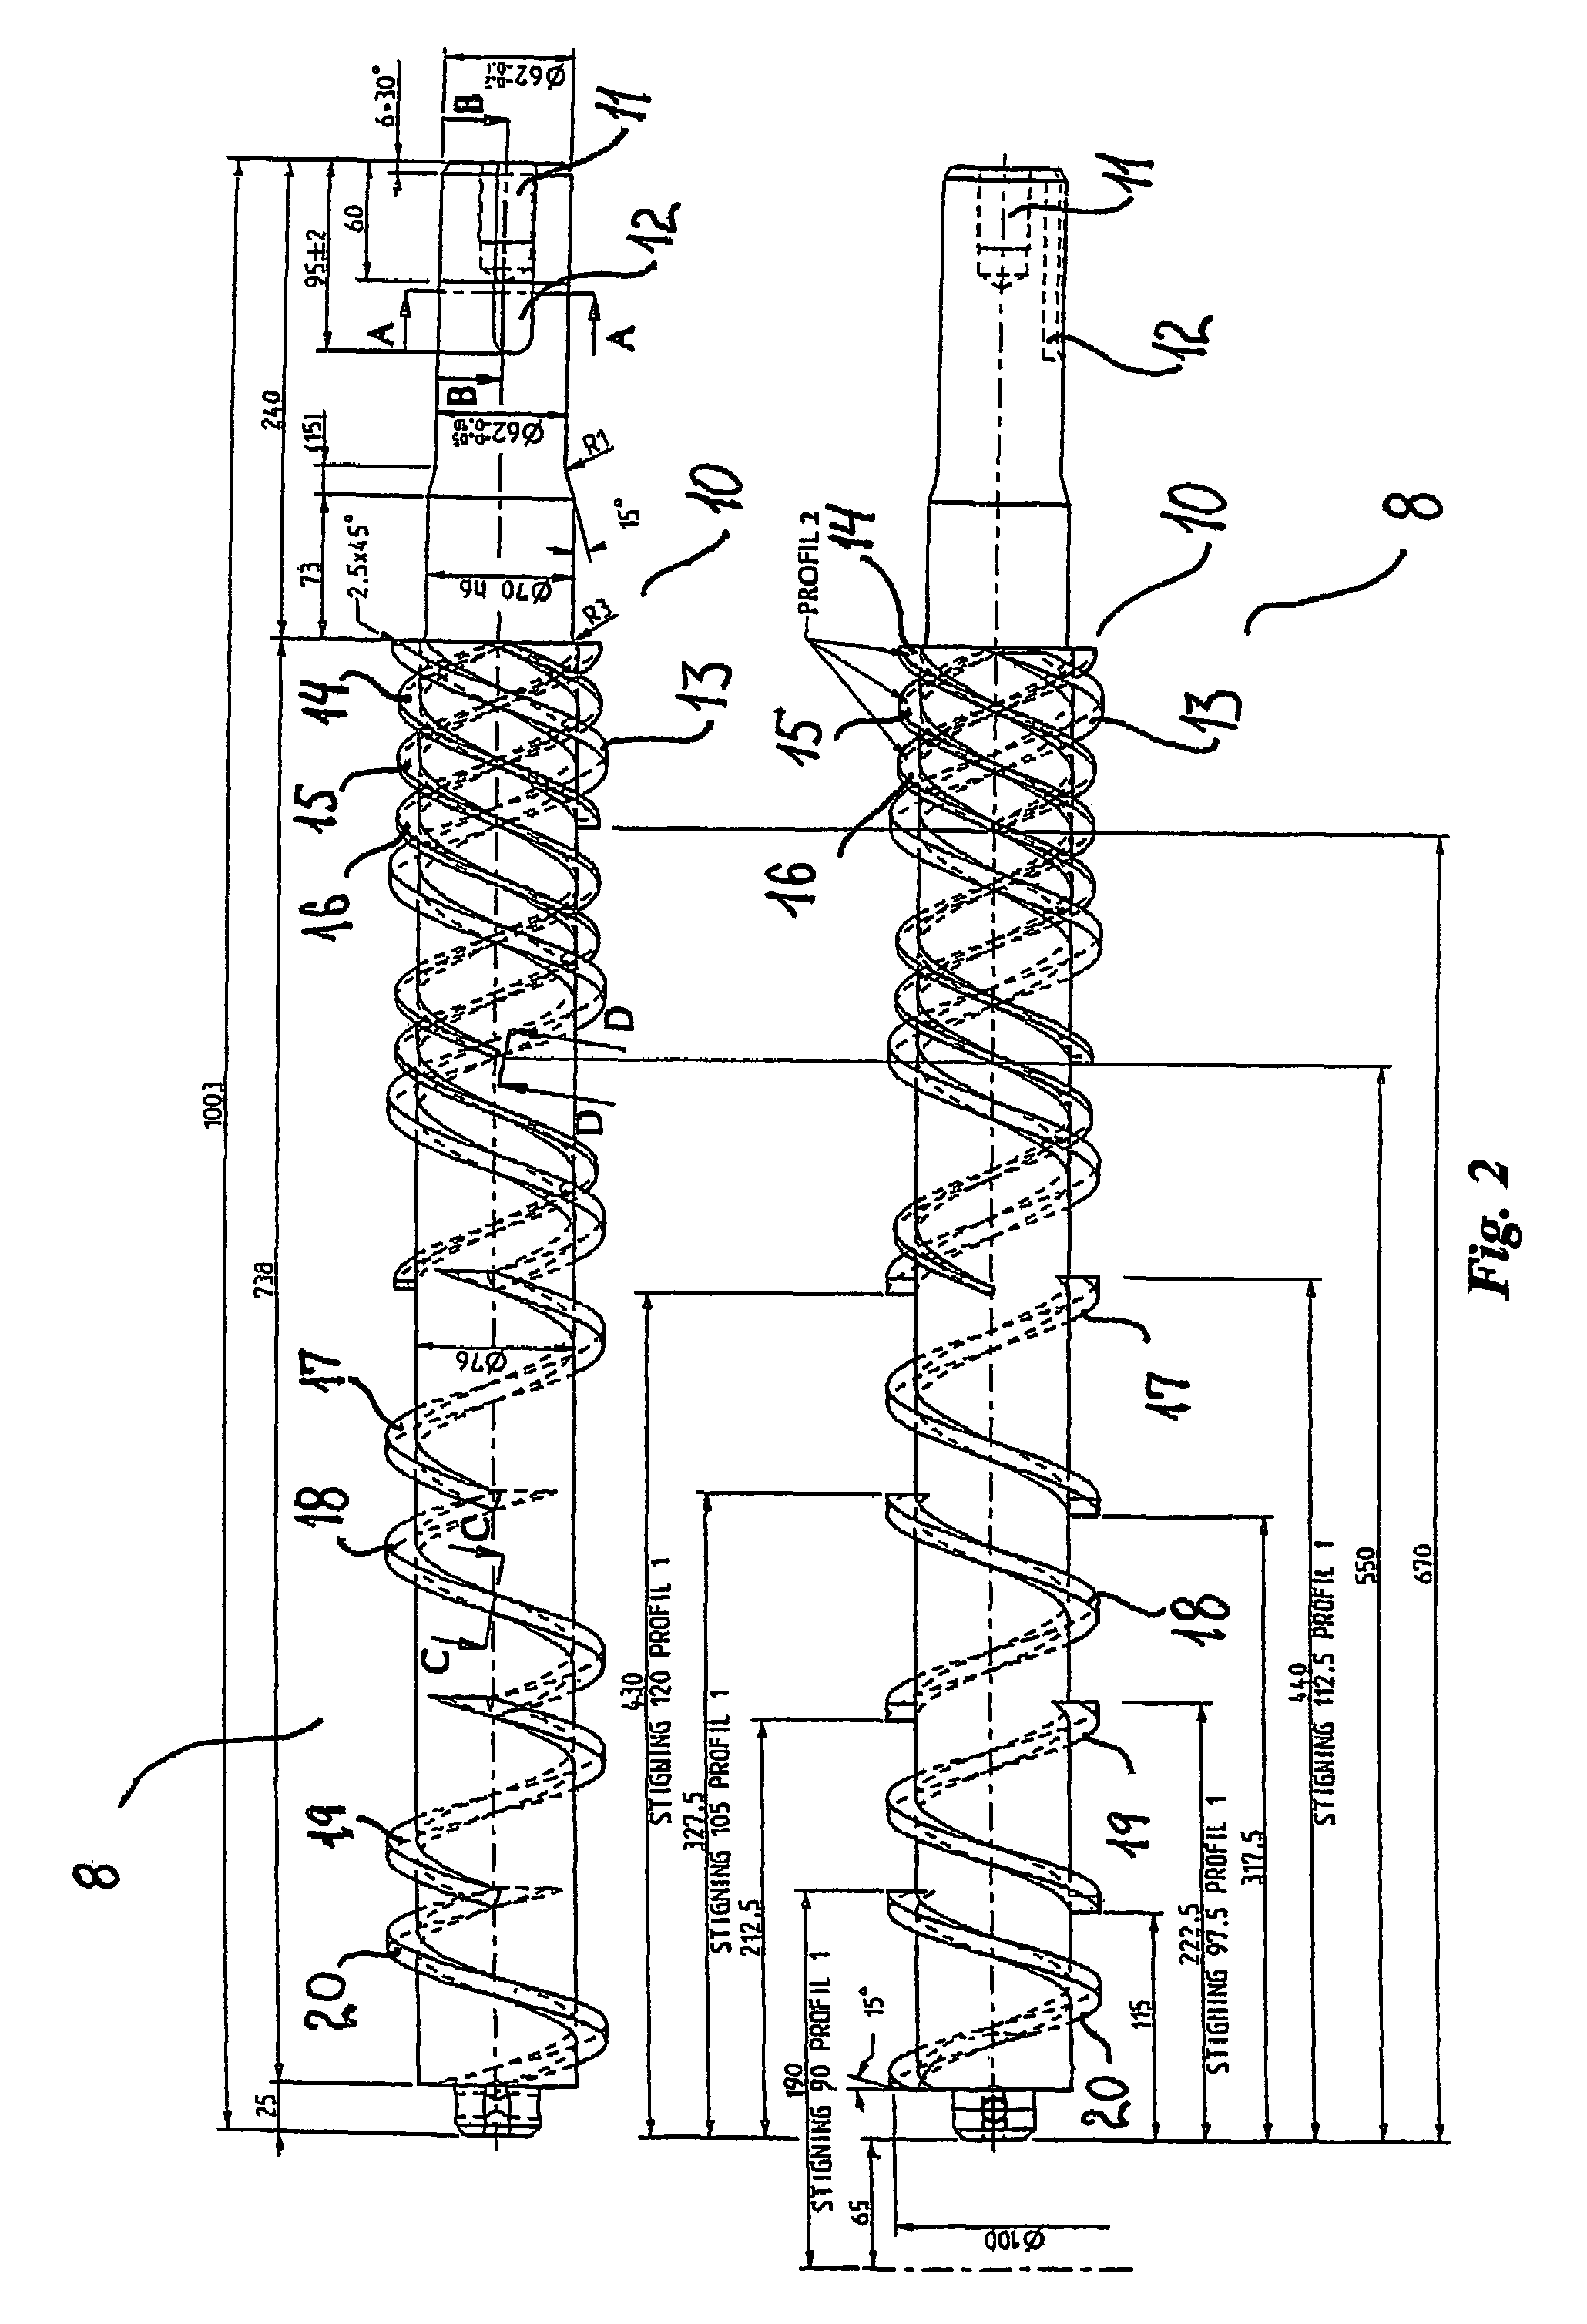 Conveyor screw for use as surface scraper in cooling and freezing units